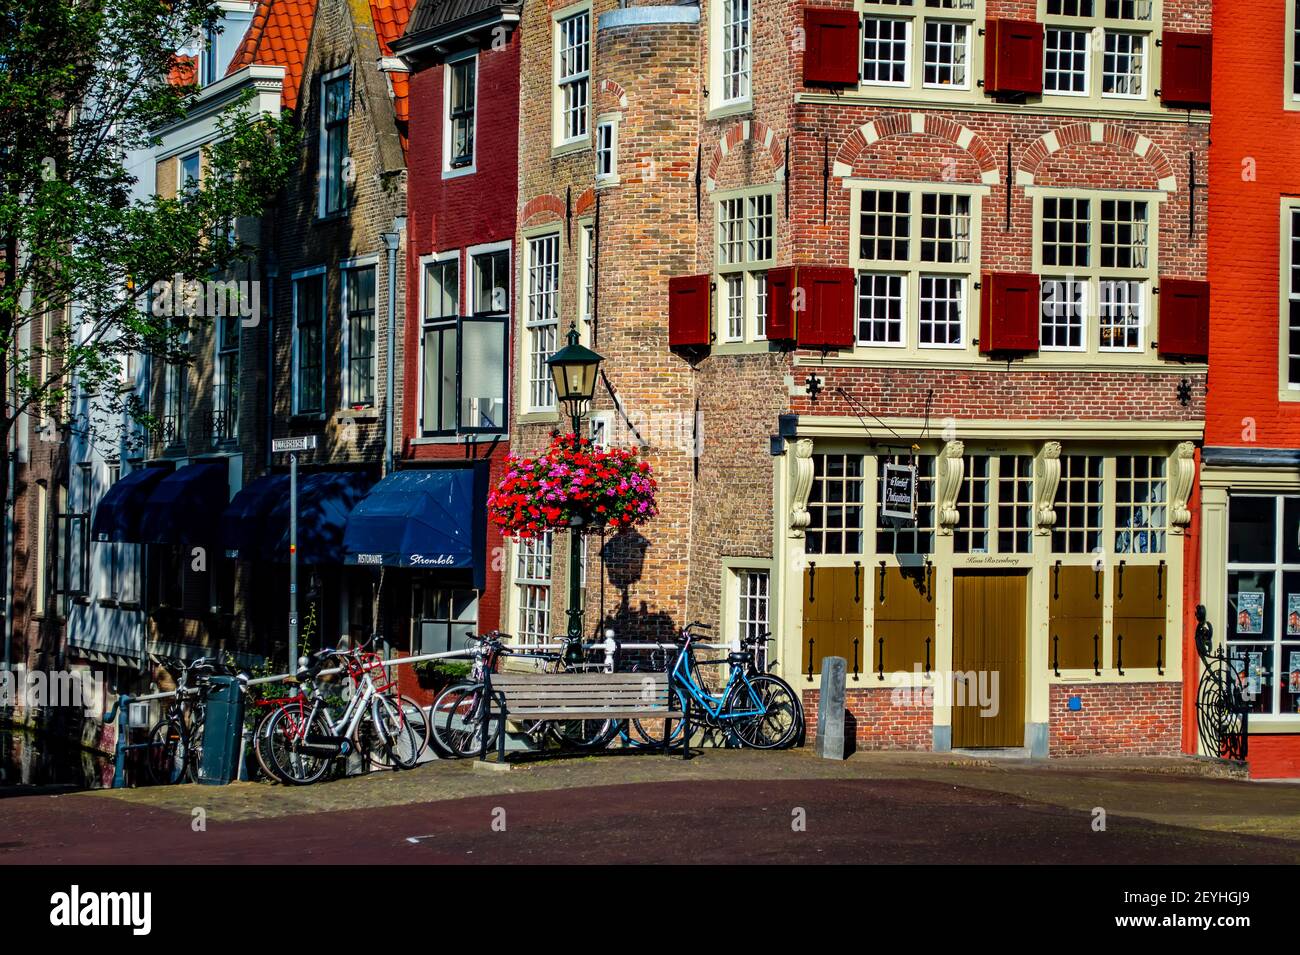 Delft, Netherlands - July 11, 2019: Typical Dutch architecture in the town of Delft, the Netherlands Stock Photo